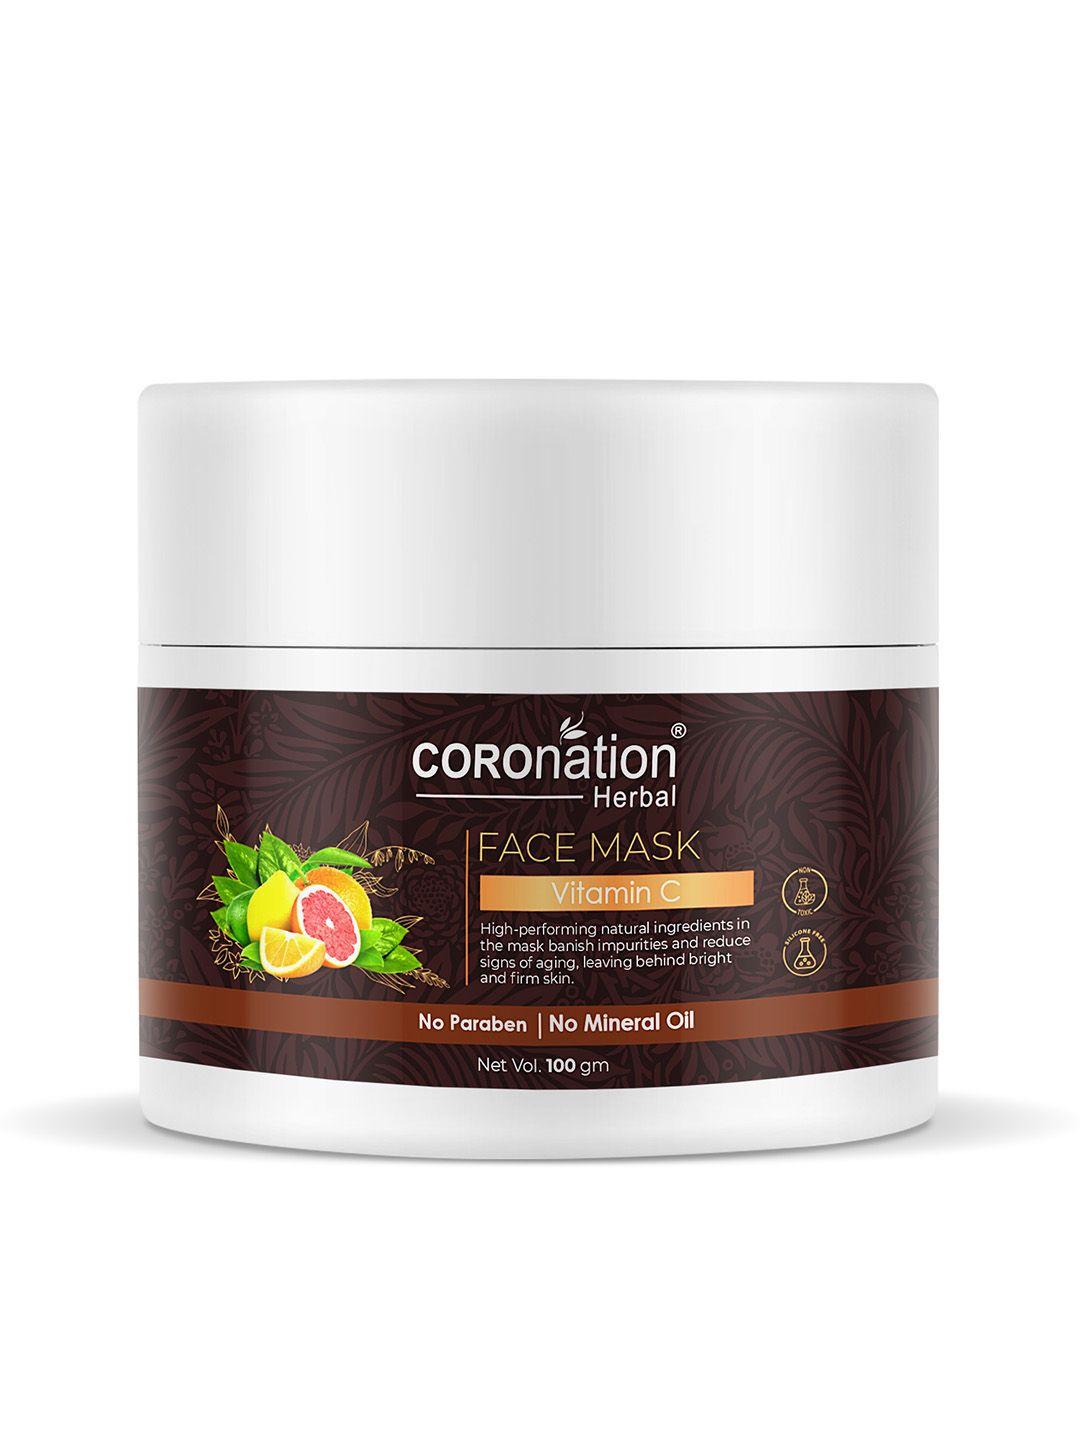 coronation herbal vitamin c face mask for bright & firm skin - 100 g